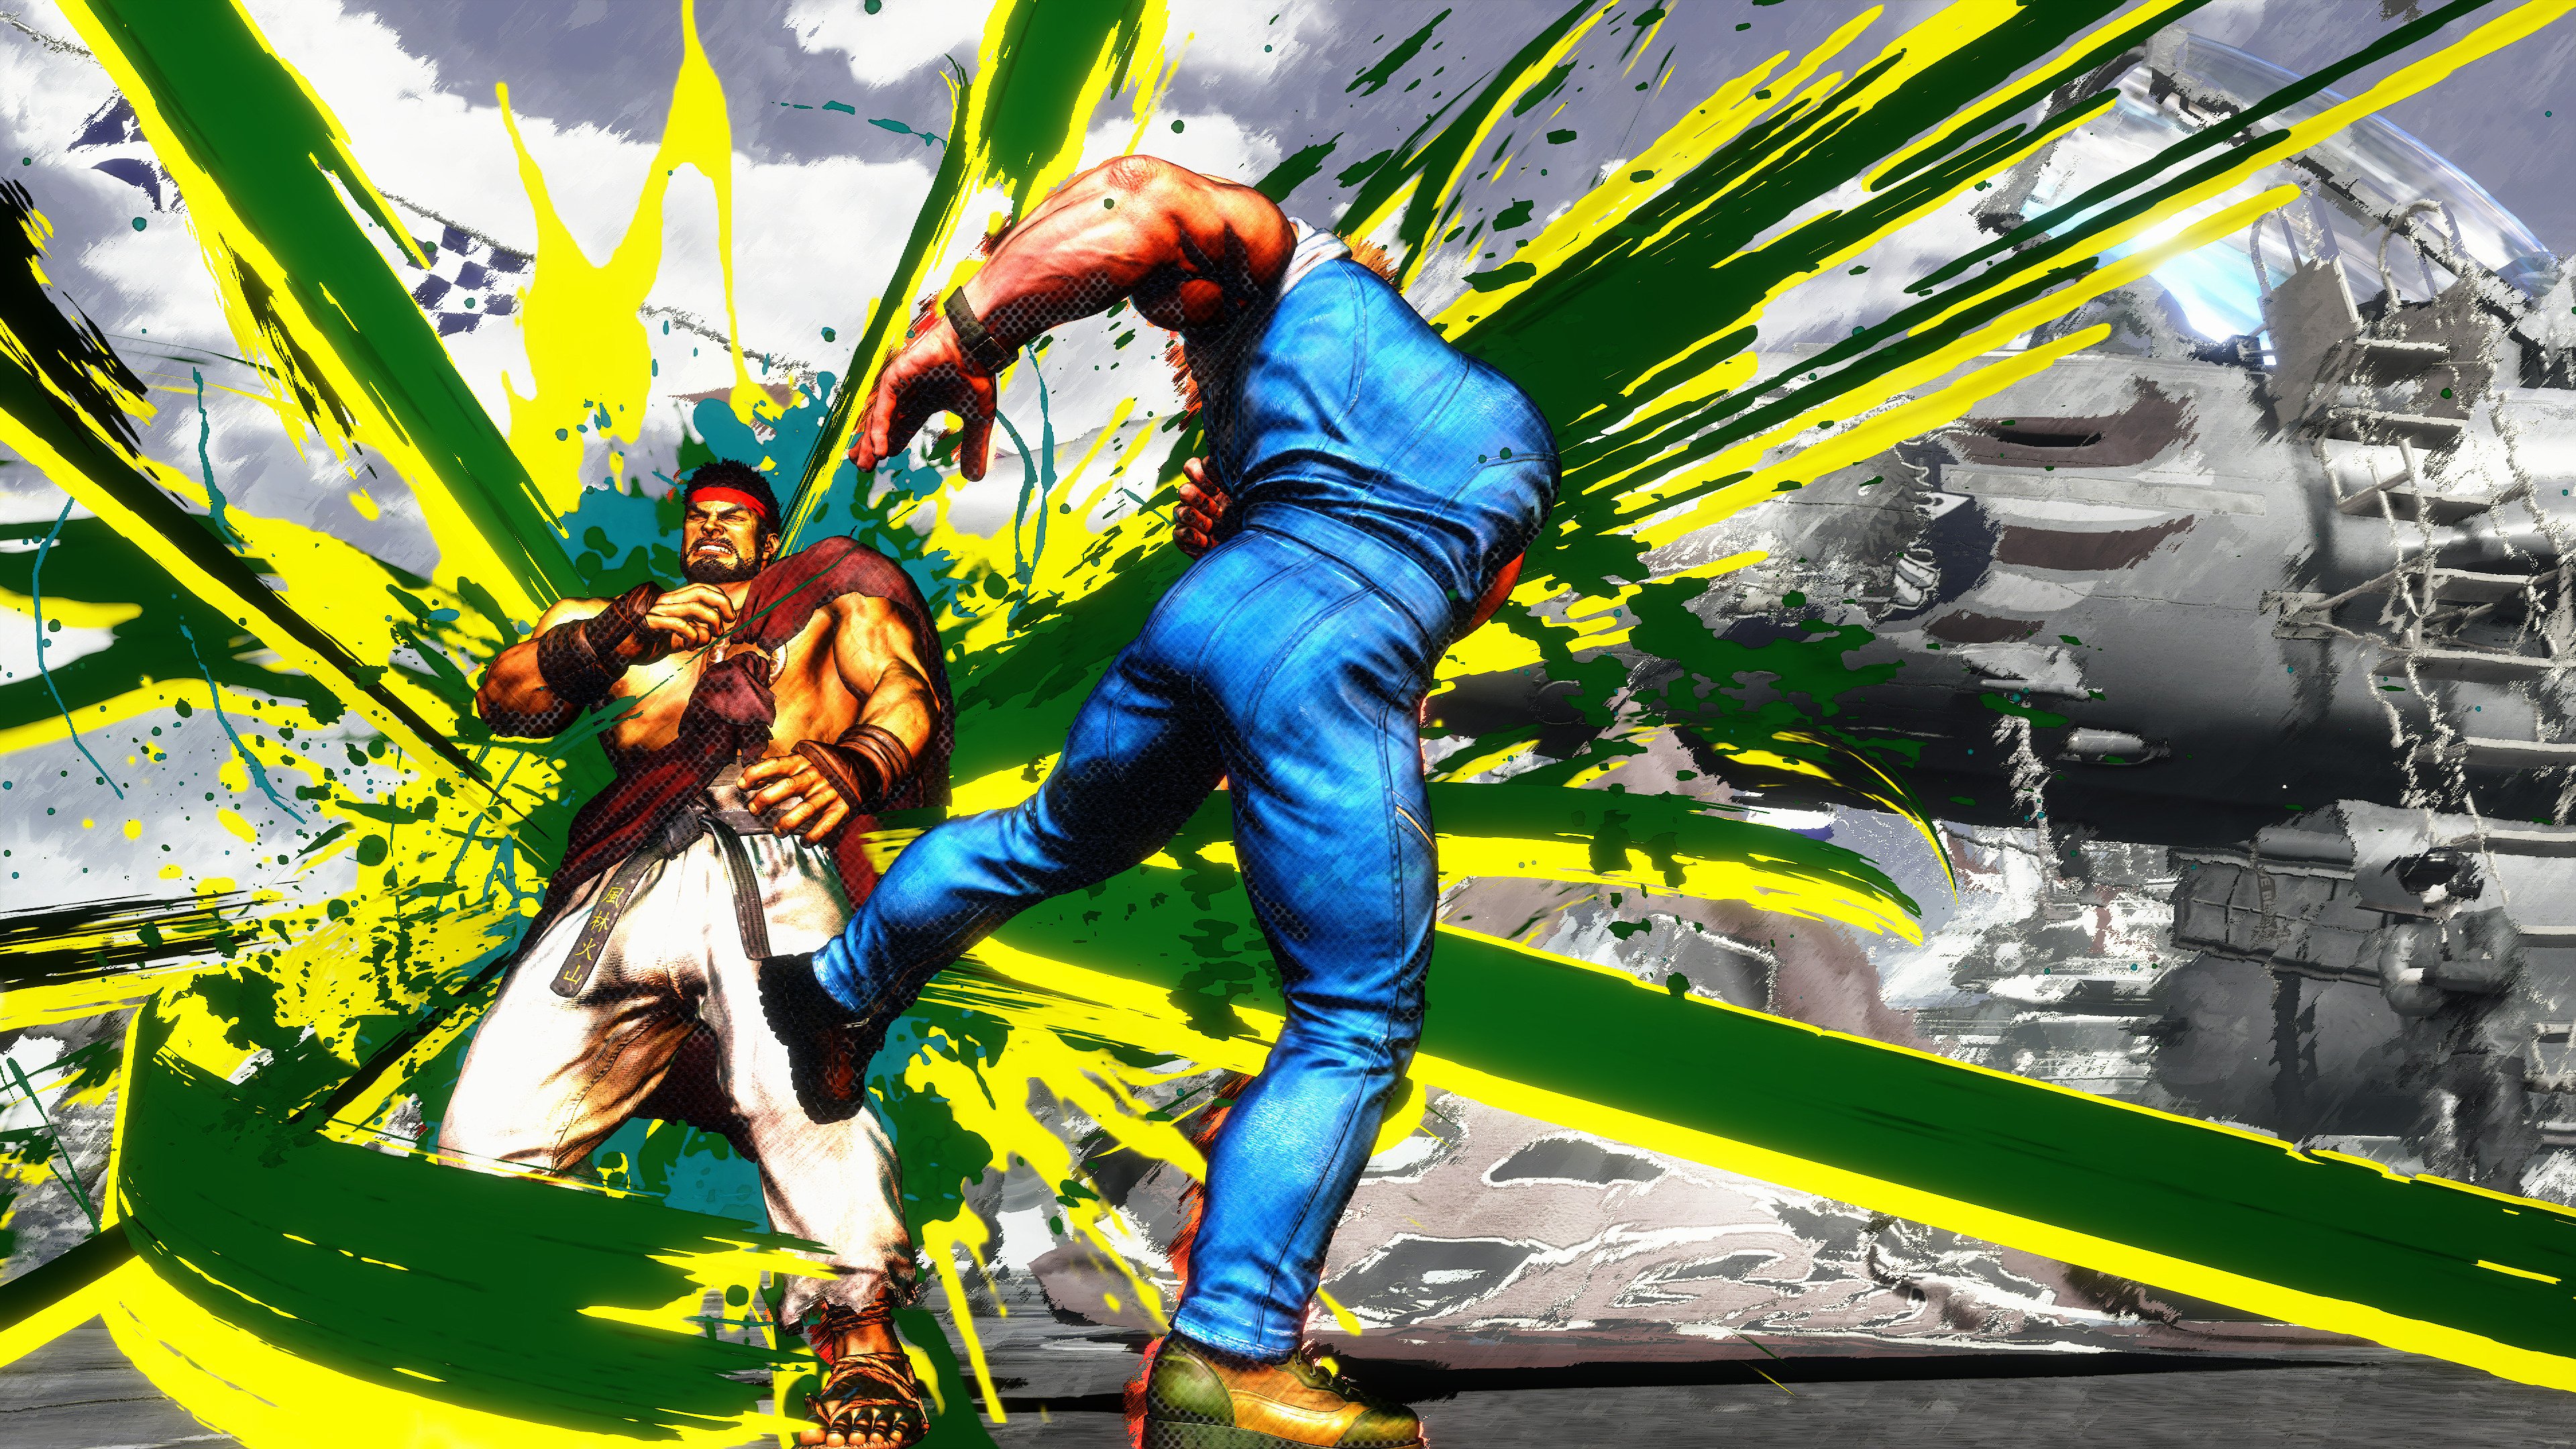 Street Fighter 6' gameplay trailer: Guile is a full-on Chad now